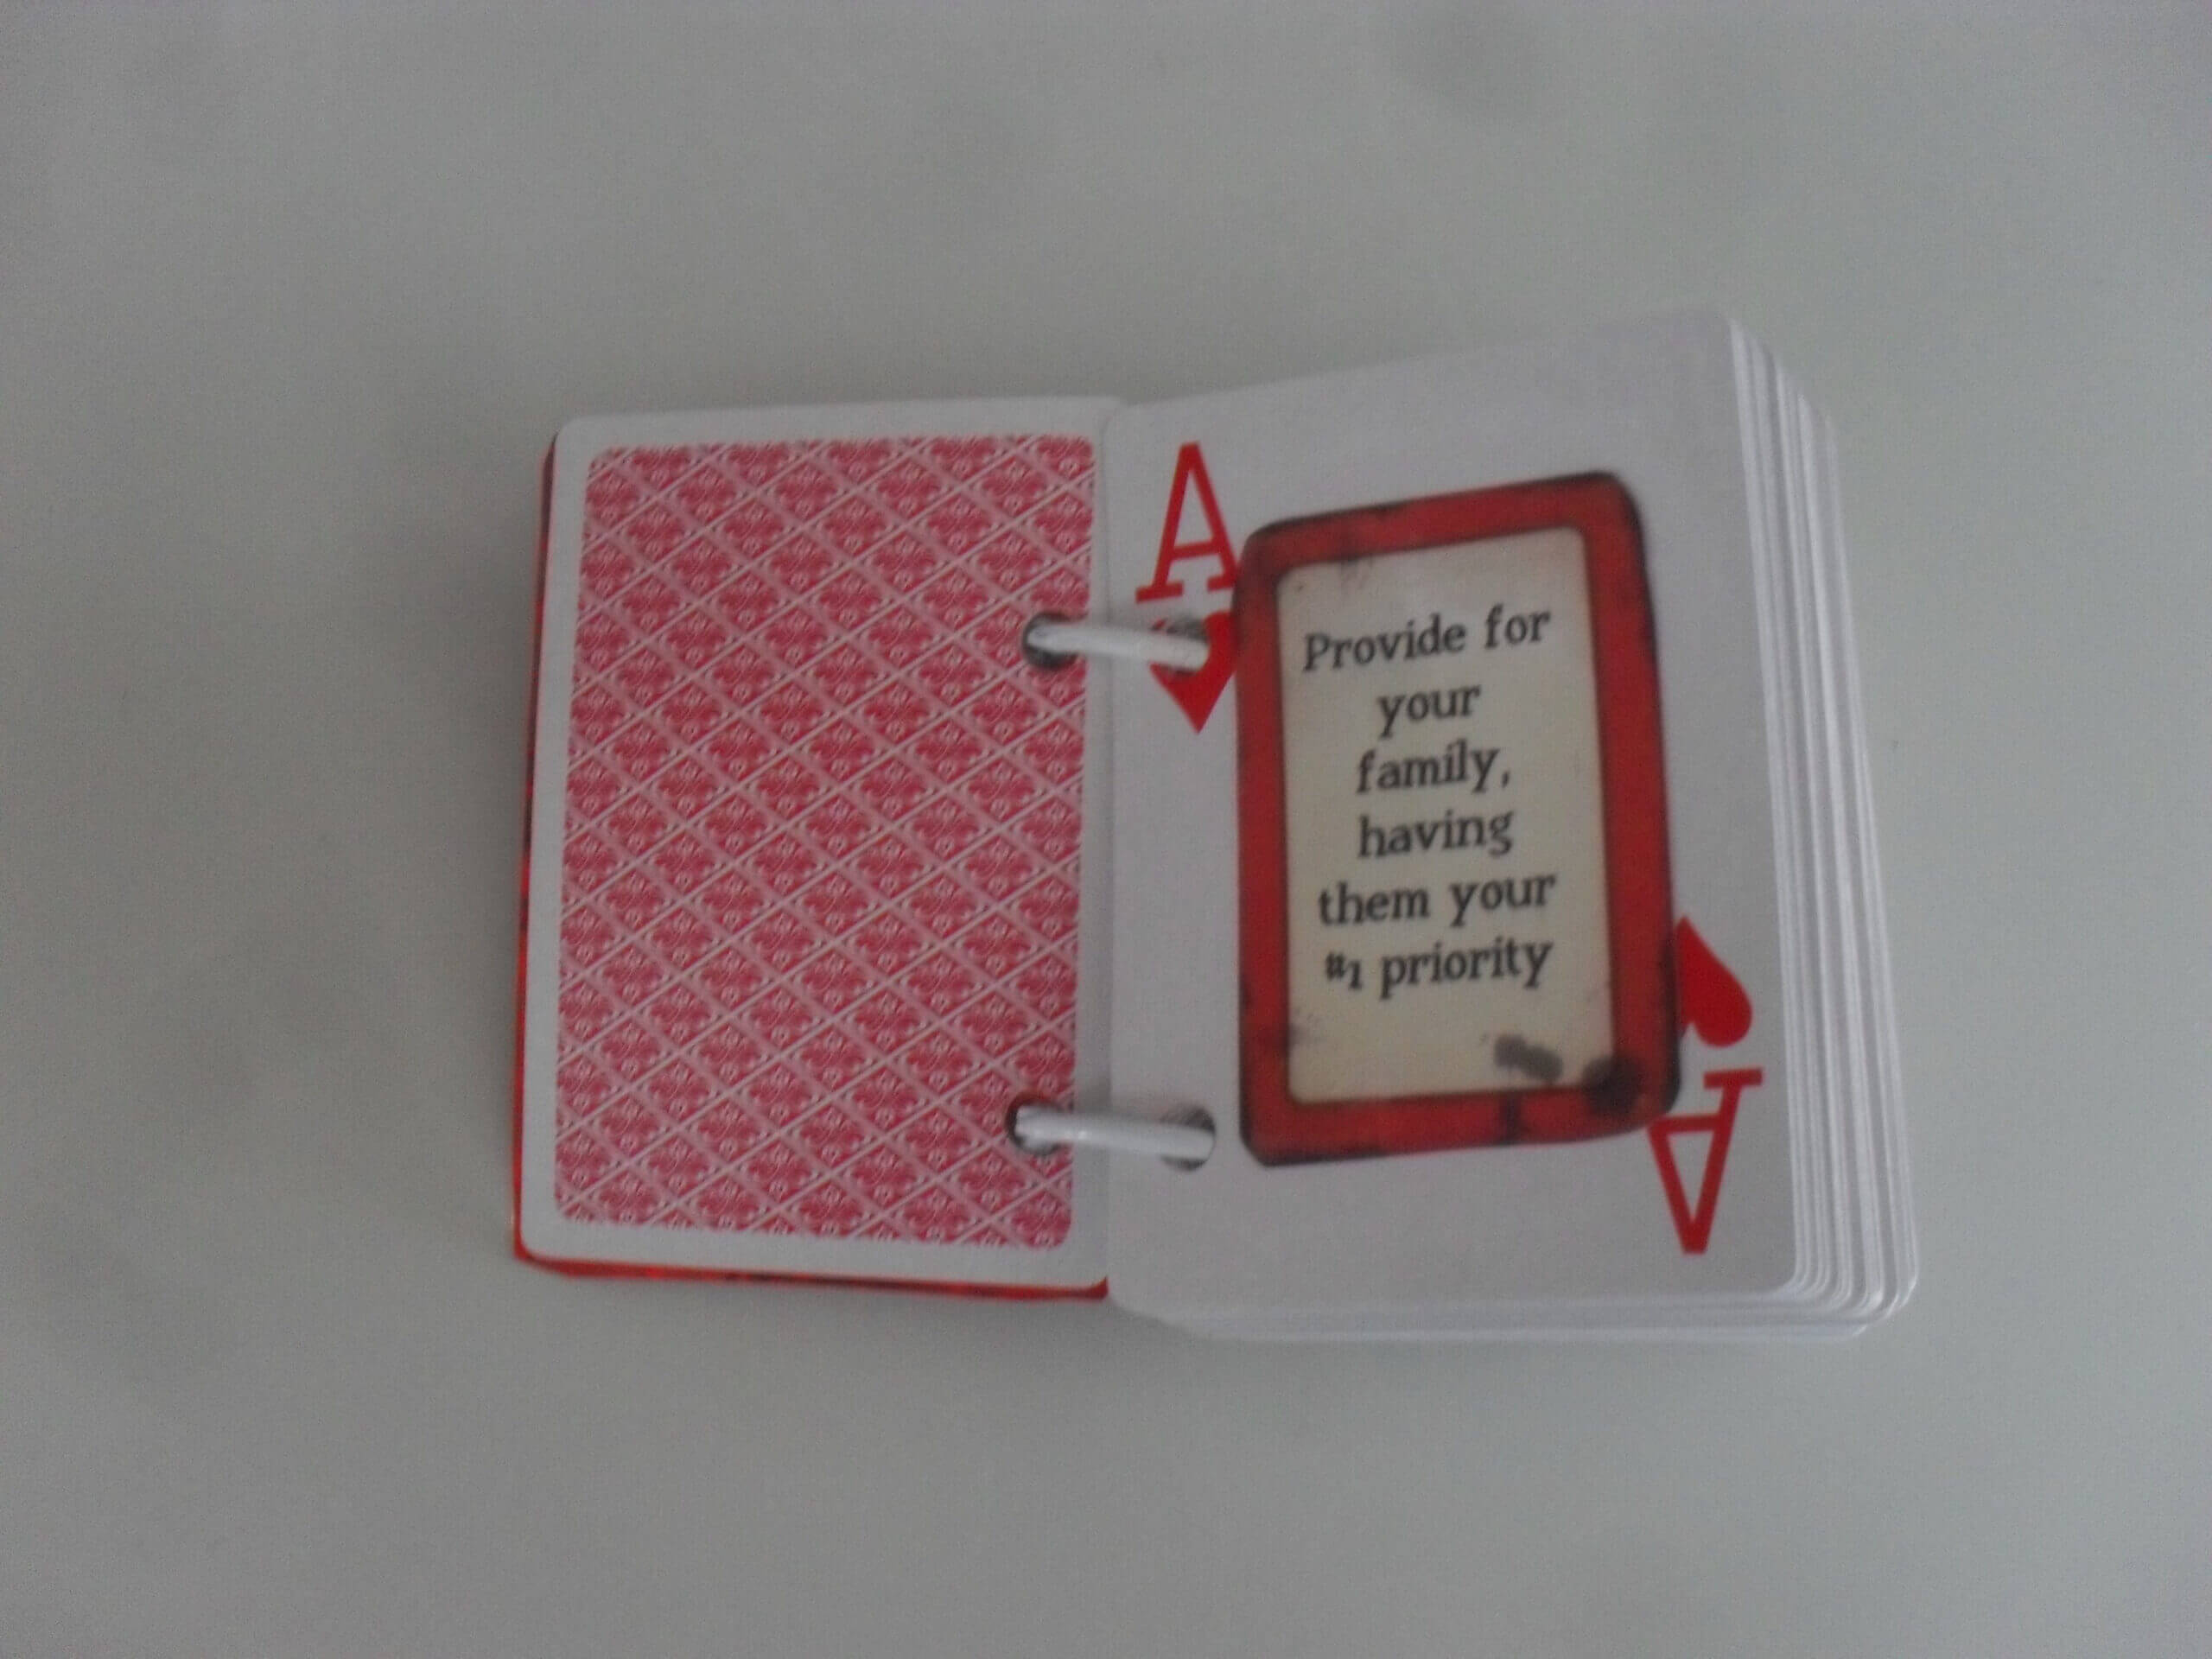 52 Reasons Why I Love You* | Tasteful Space % Throughout 52 Things I Love About You Deck Of Cards Template